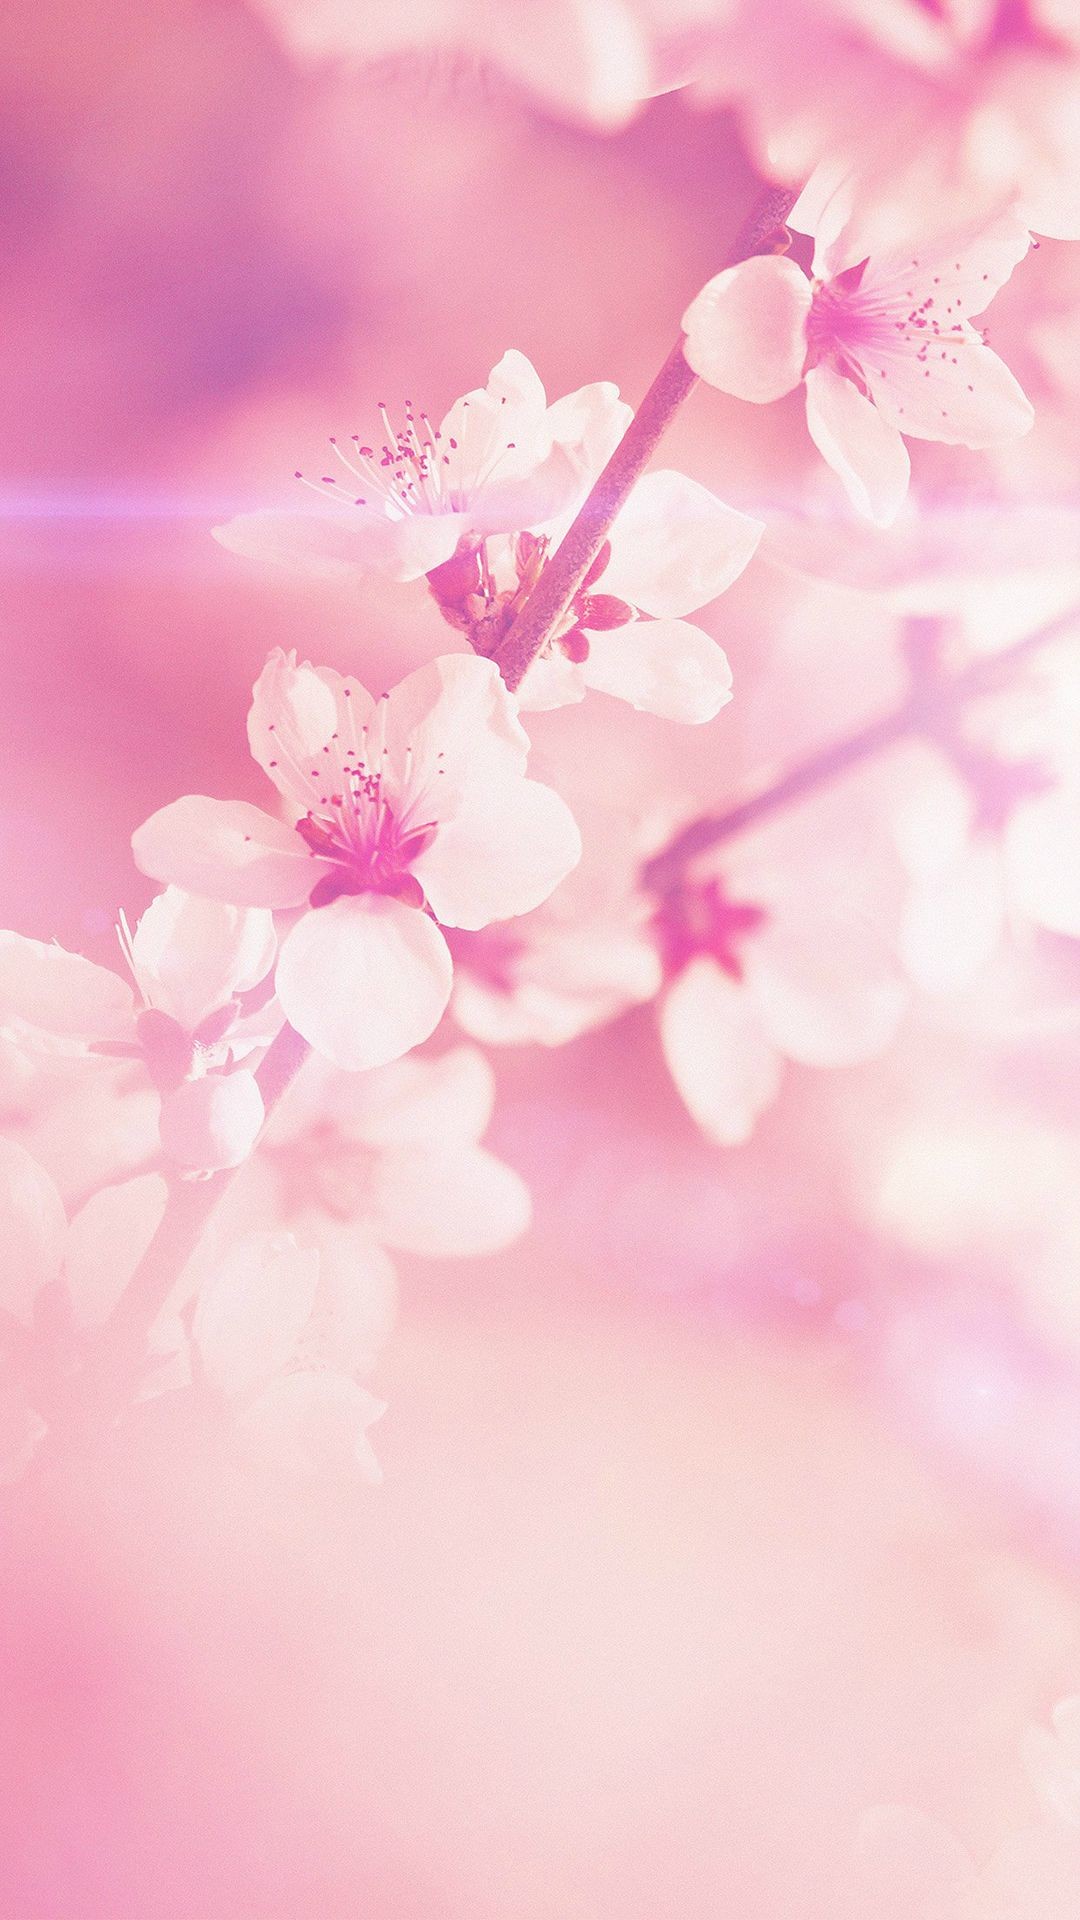 1080x1920, Pictures Of Flowers For Cell Phone - Iphone Backgrounds Pink - HD Wallpaper 